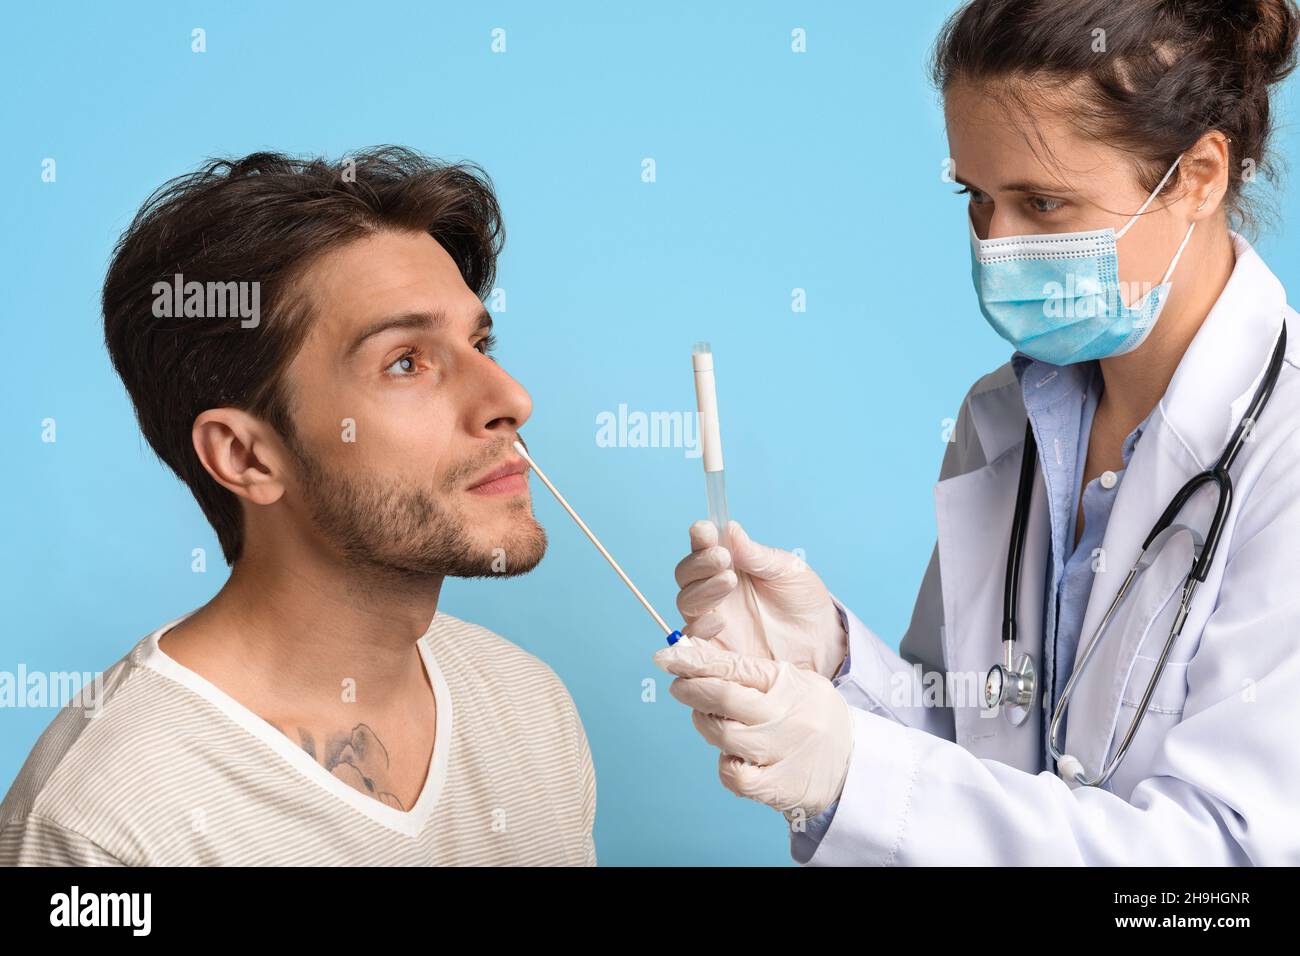 PCR Coronavirus Test. Female Doctor Taking Swab From Male Patient's Nose Stock Photo